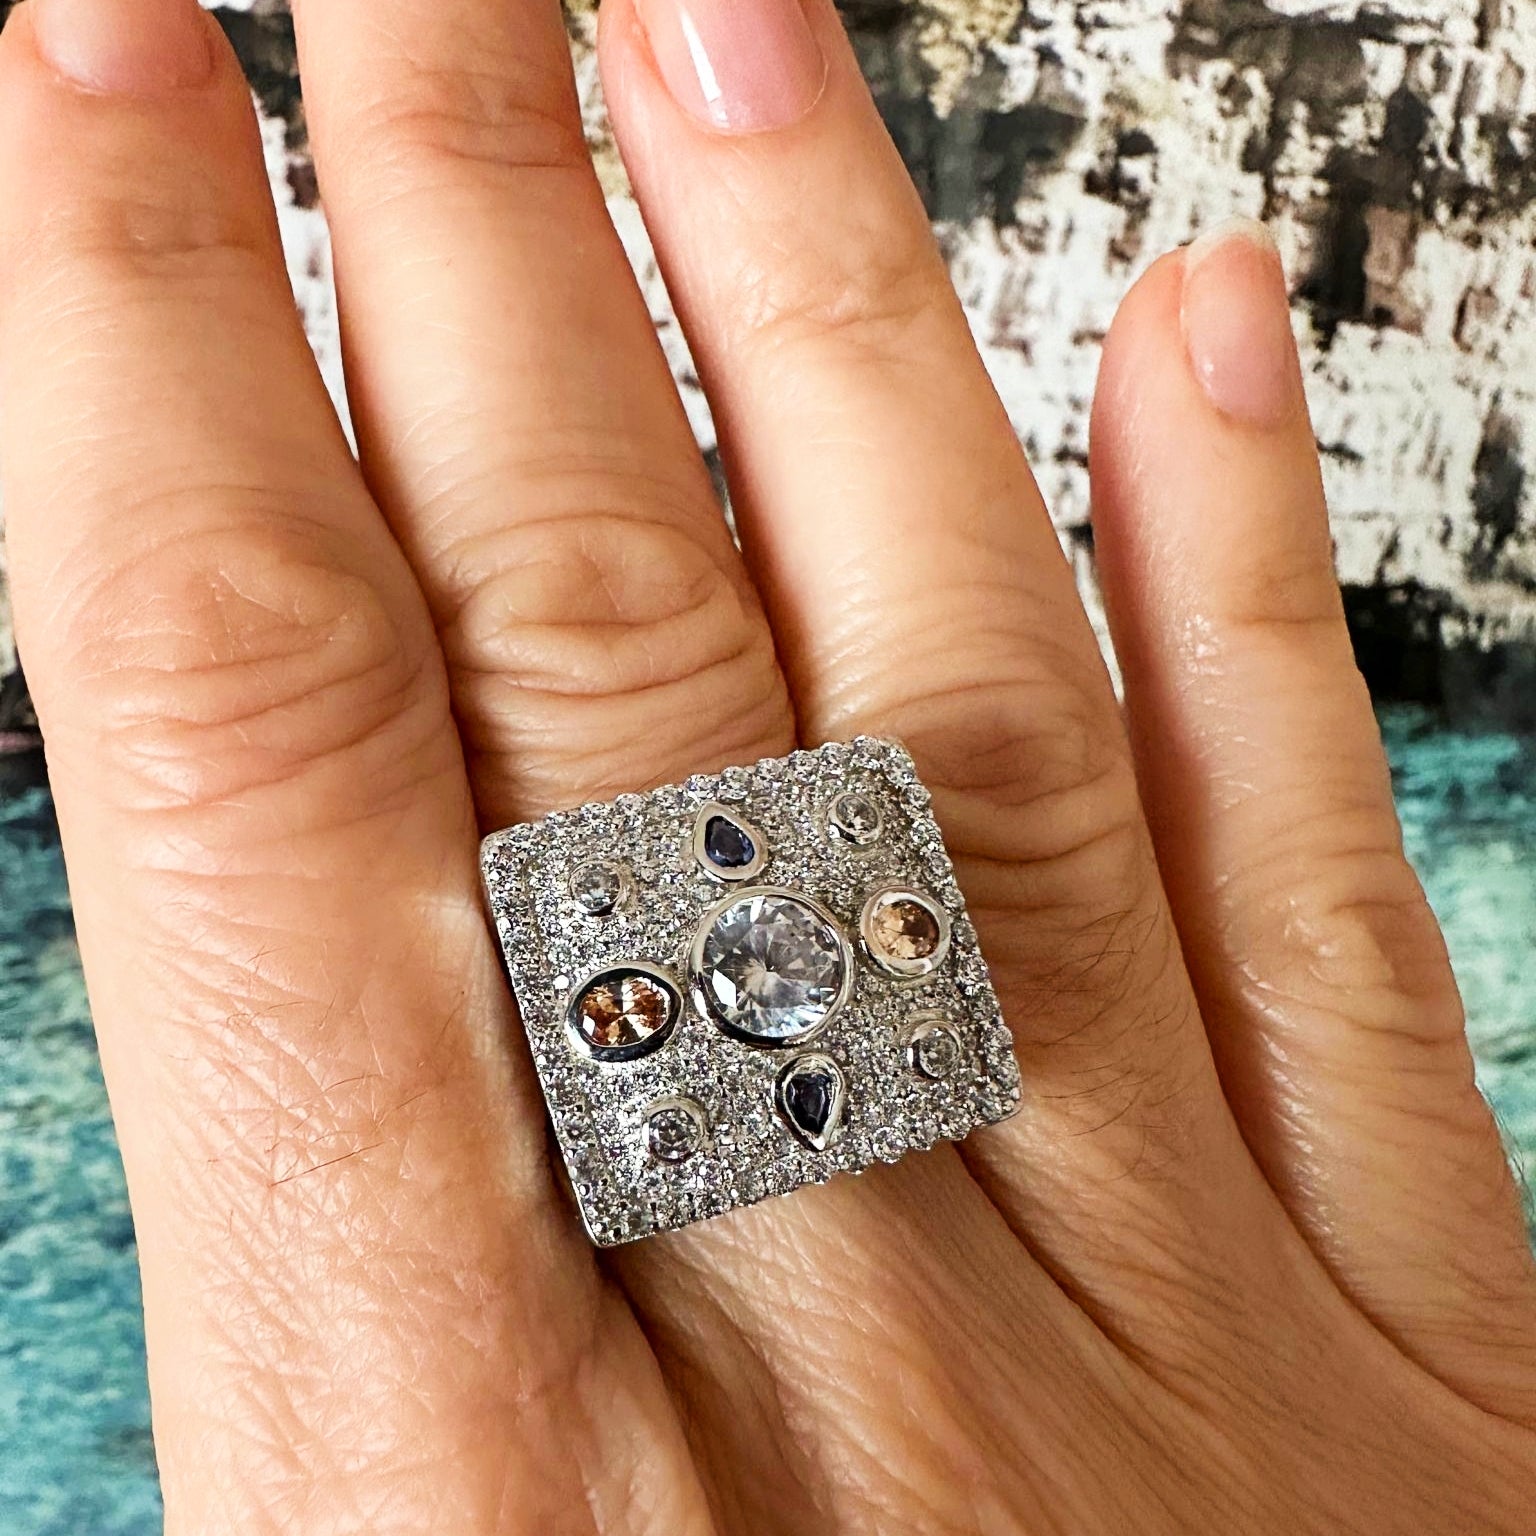 Antique Pillow Ring in 925 sterling silver with a geometric design, sparkling clear, champagne and blue topaz cubic zirconia stones. Worldwide shipping from Australia